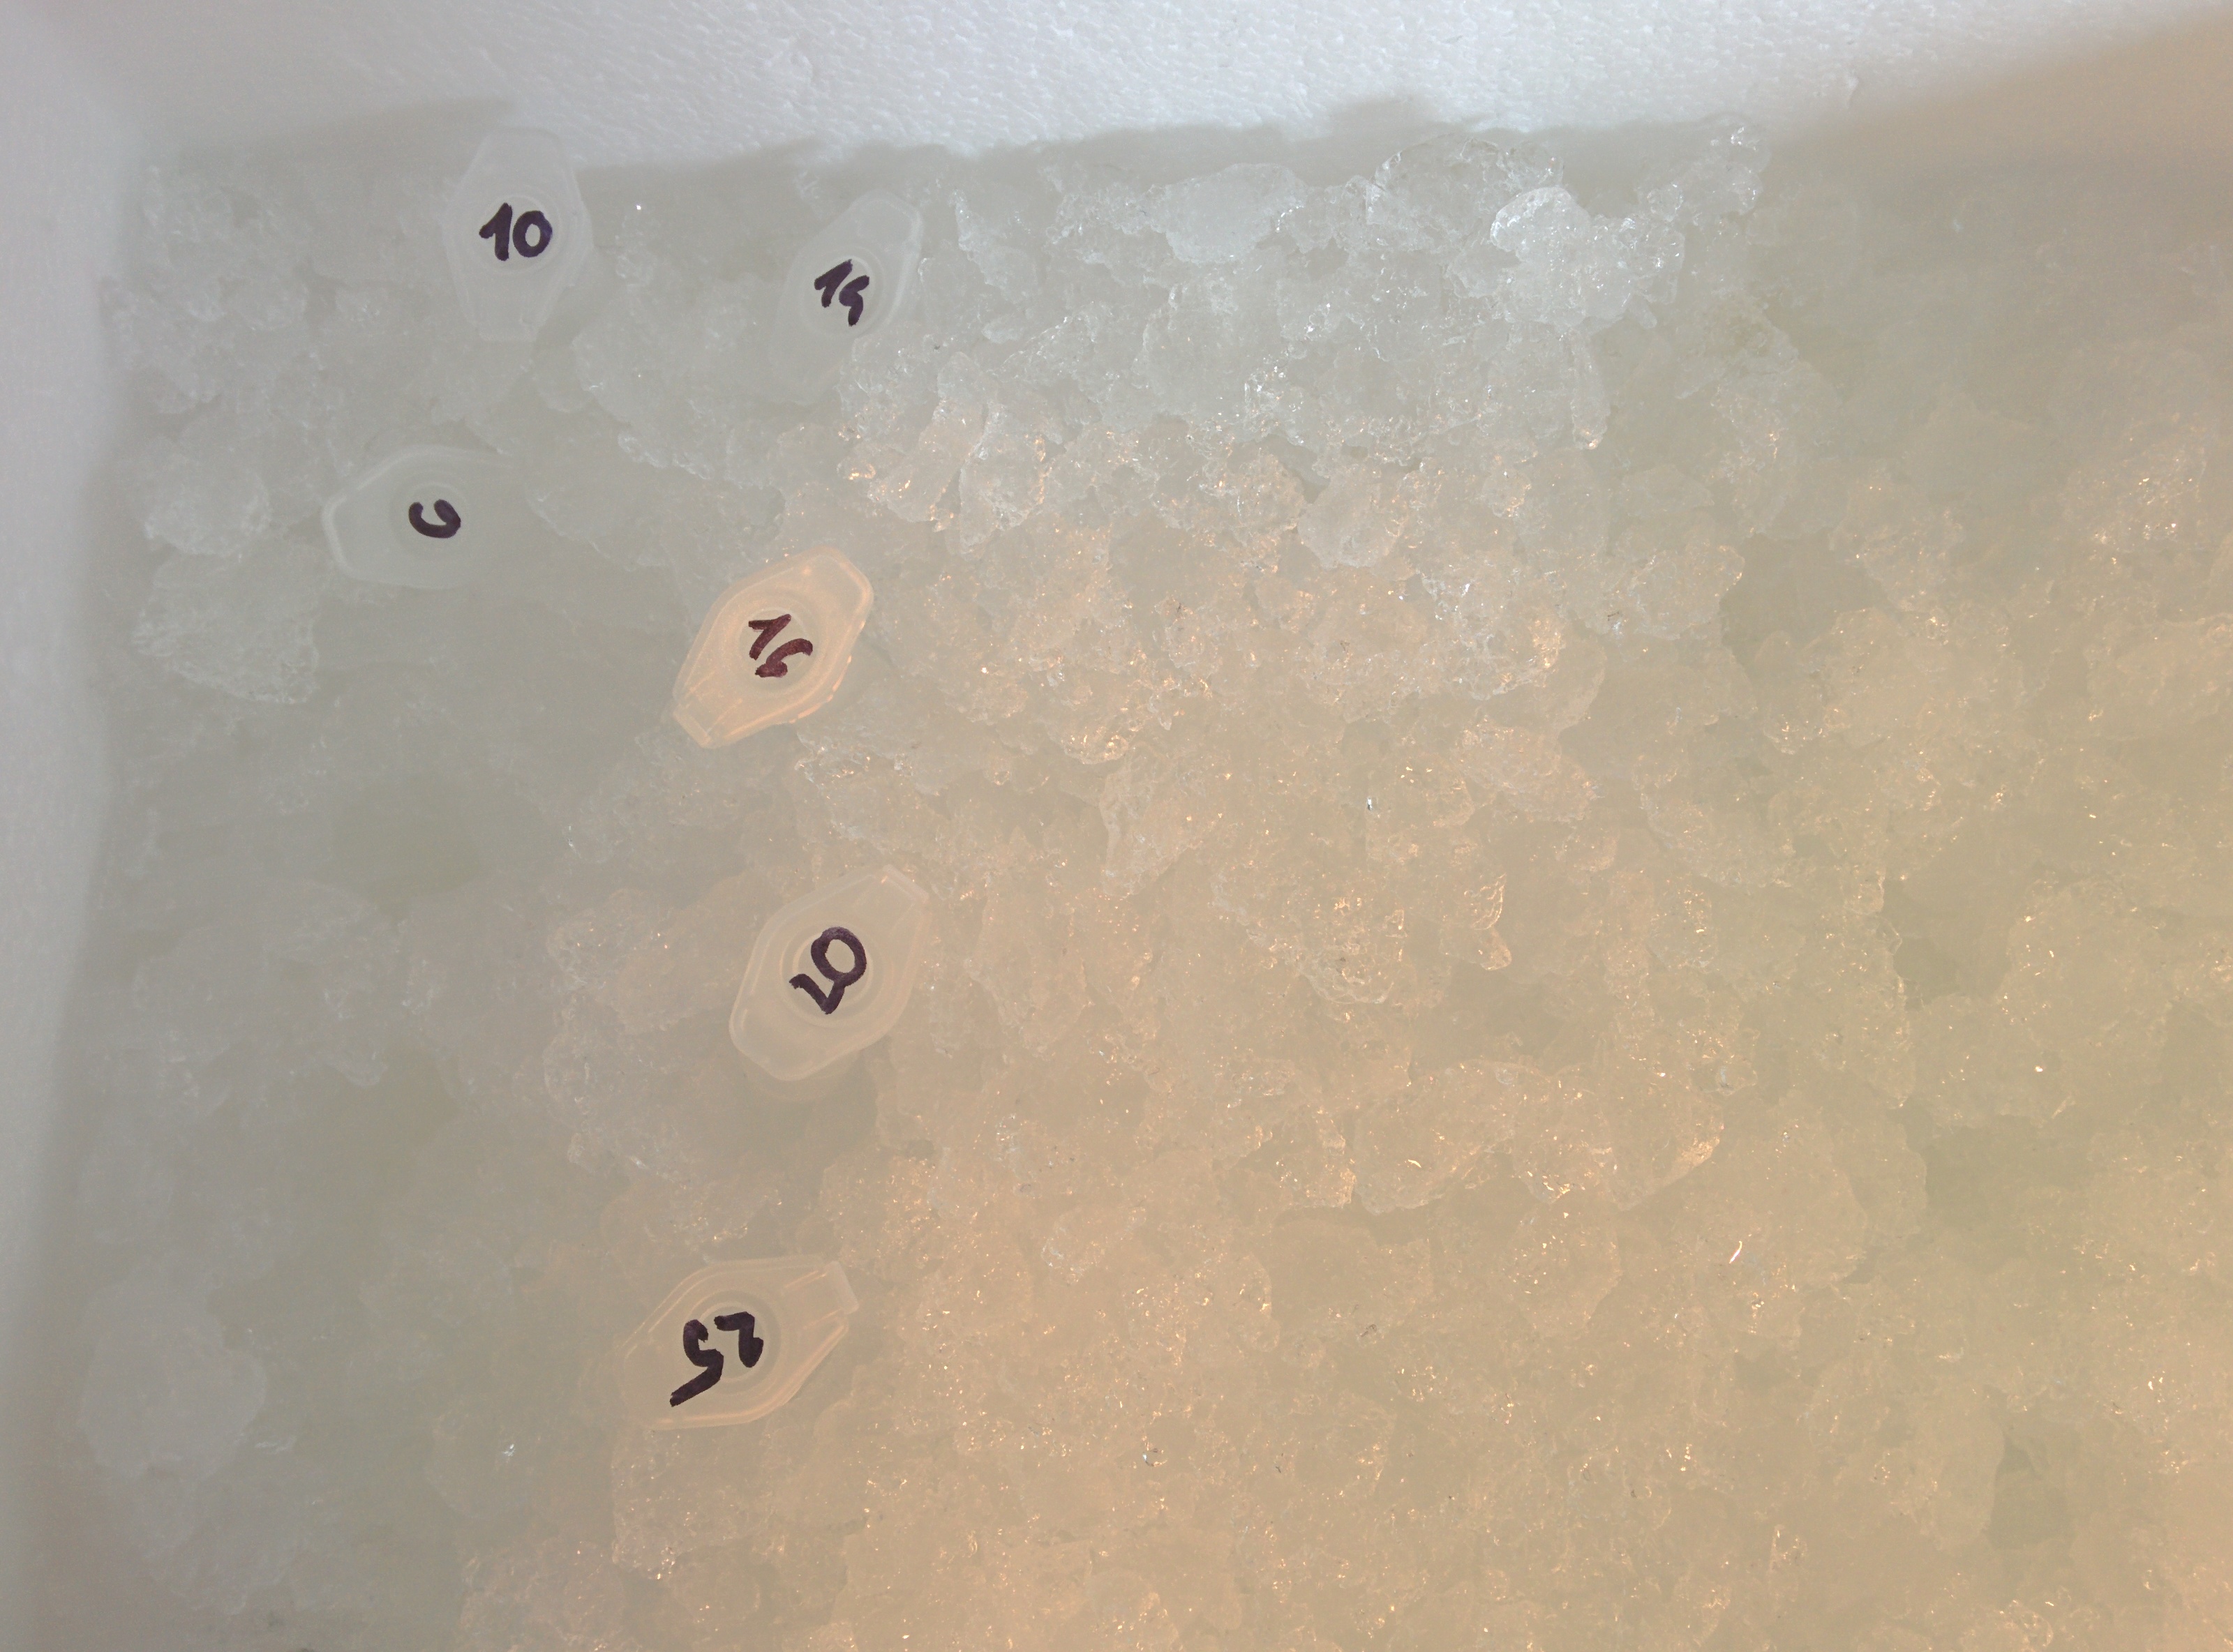 Picture 4: The lysates stored in ice